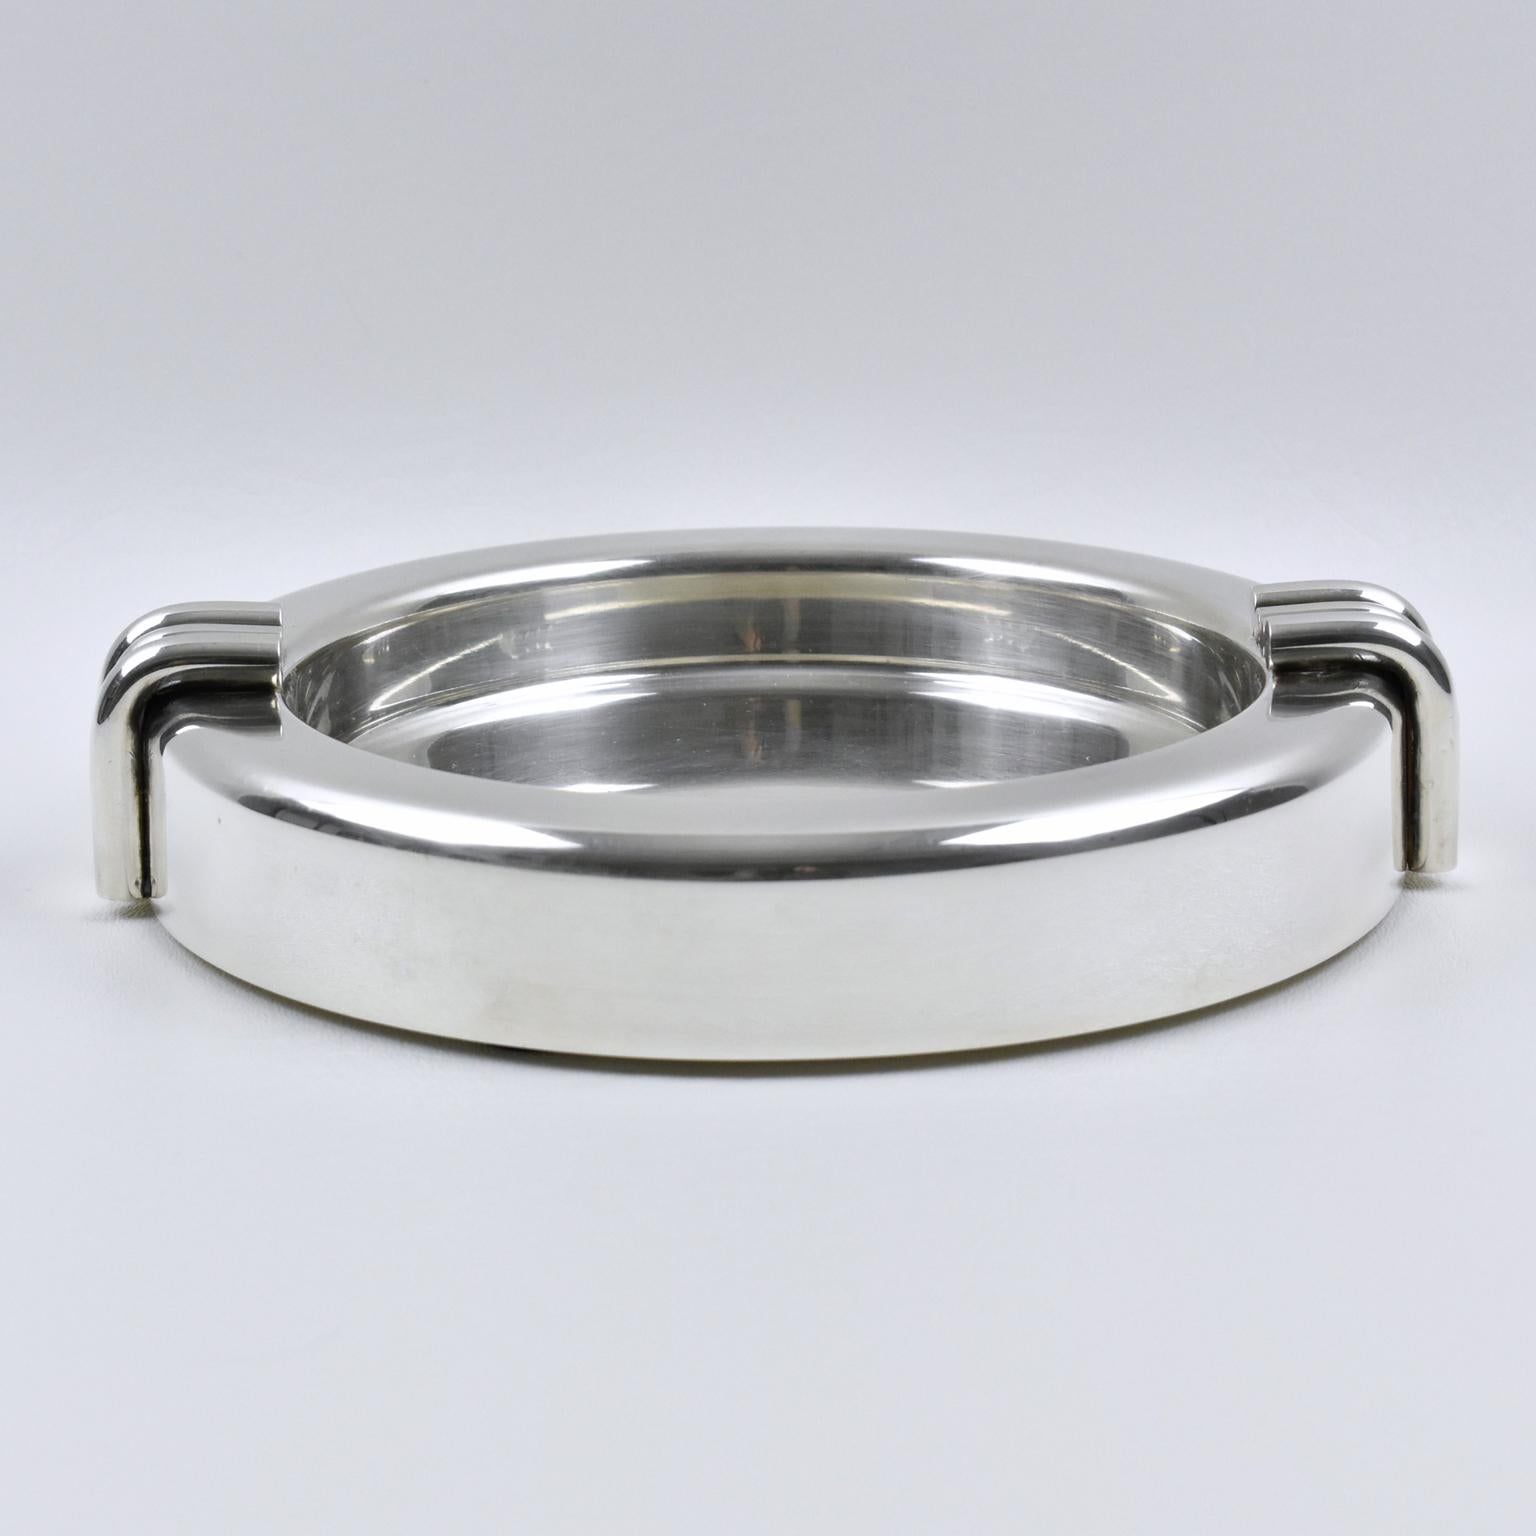 Elegant Christian Dior, Paris modernist large cigar ashtray or desk accessory. This silver plate sophisticated catchall features iconic streamline design with clean lines. Marked underside: Christian Dior.
Measurements: 7.88 in. diameter (20 cm) x